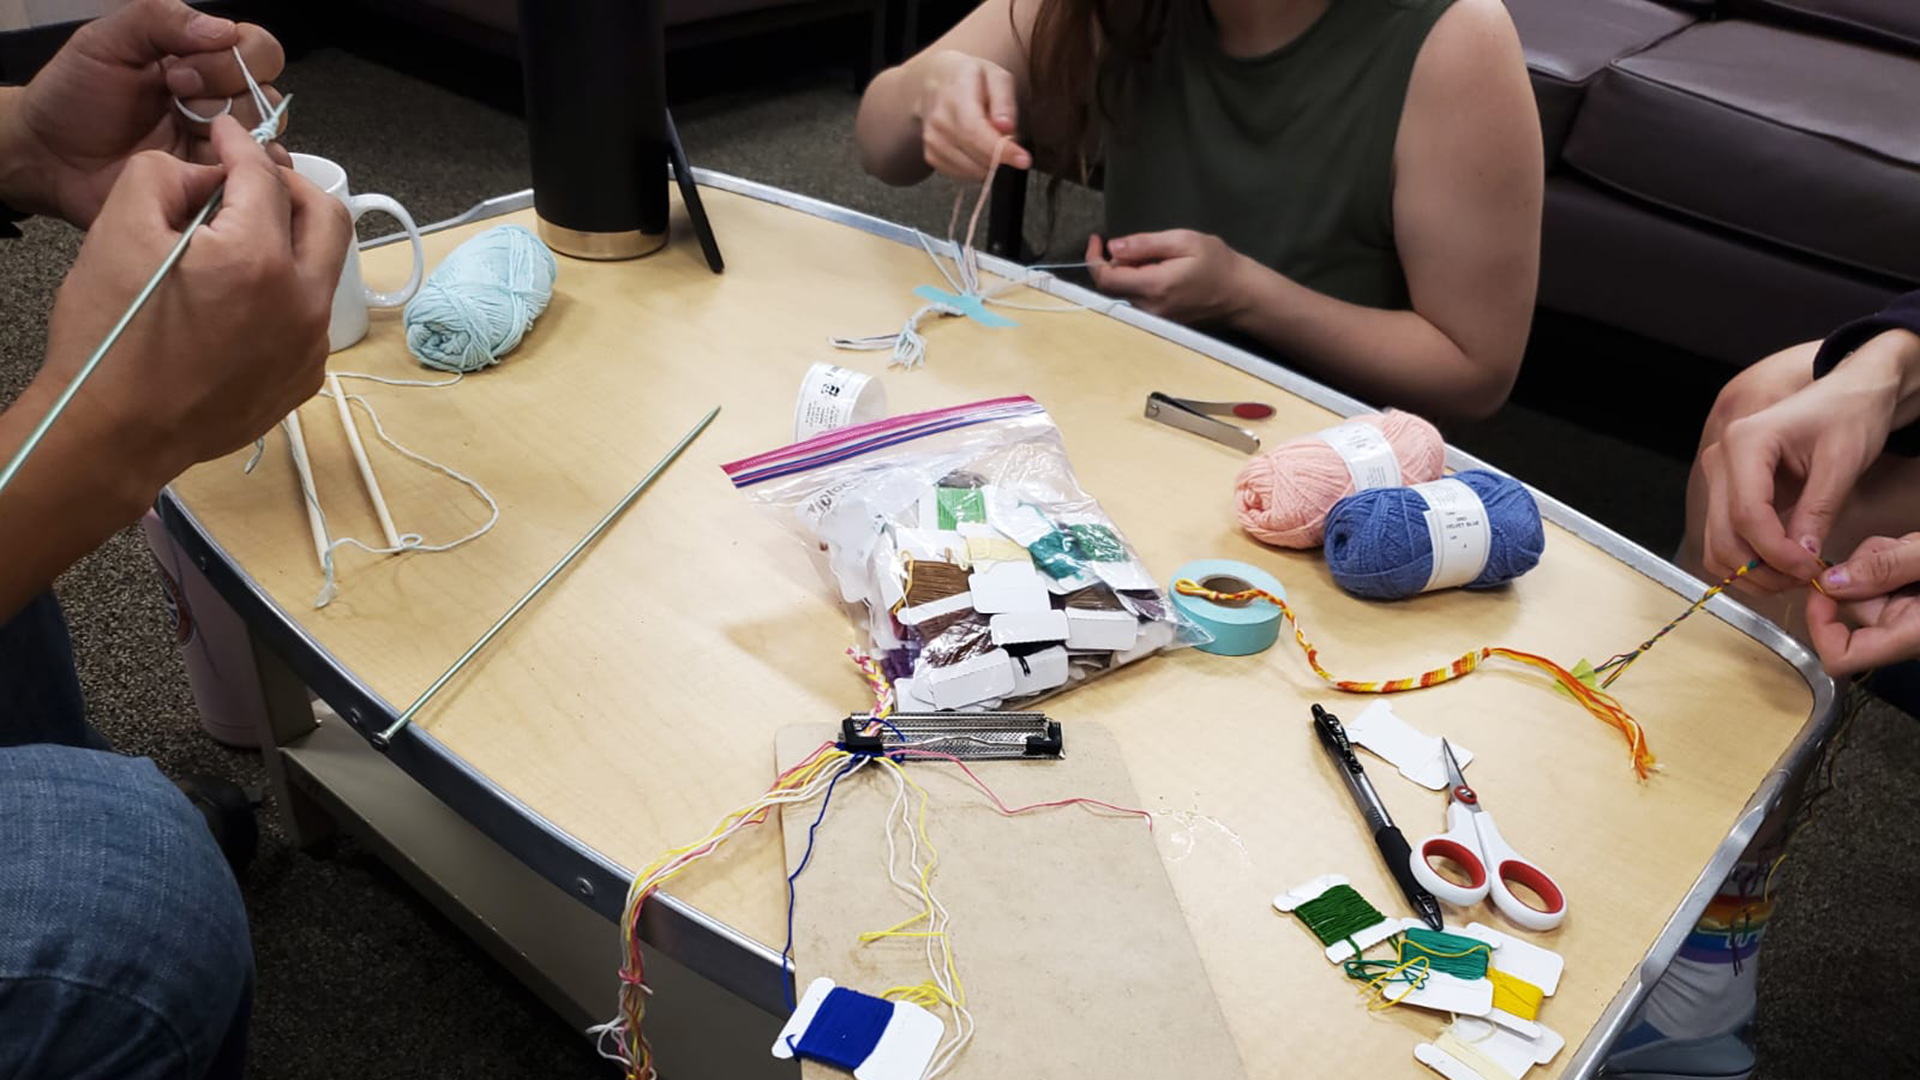 Evening arts and crafts! We got friendship bracelet making and knitting. Photo by Vic Dina.